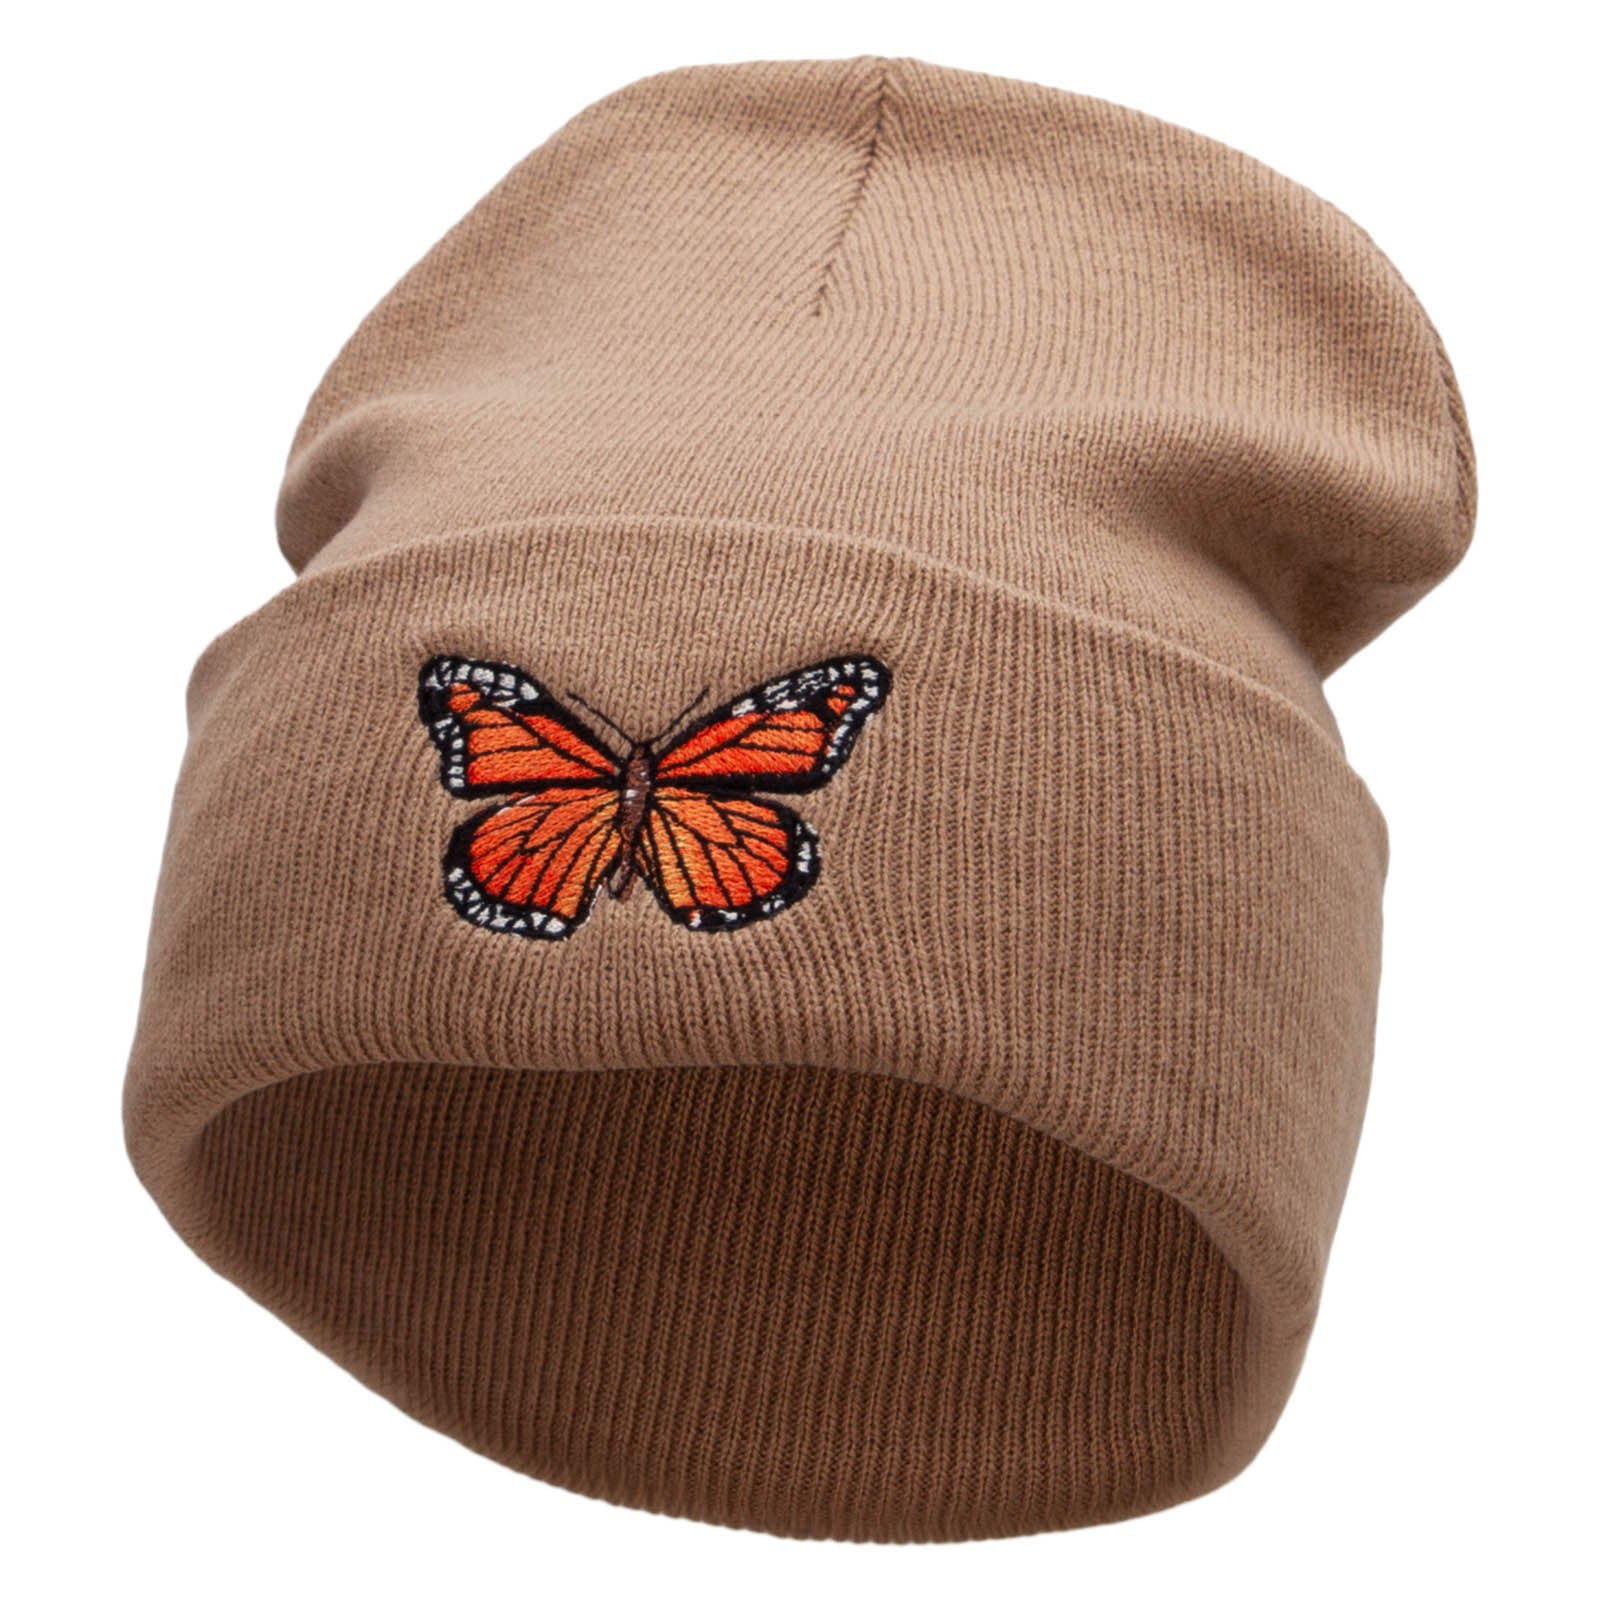 The Monarch Butterfly Embroidered 12 inch Acrylic Cuffed Long Beanie - Khaki OSFM